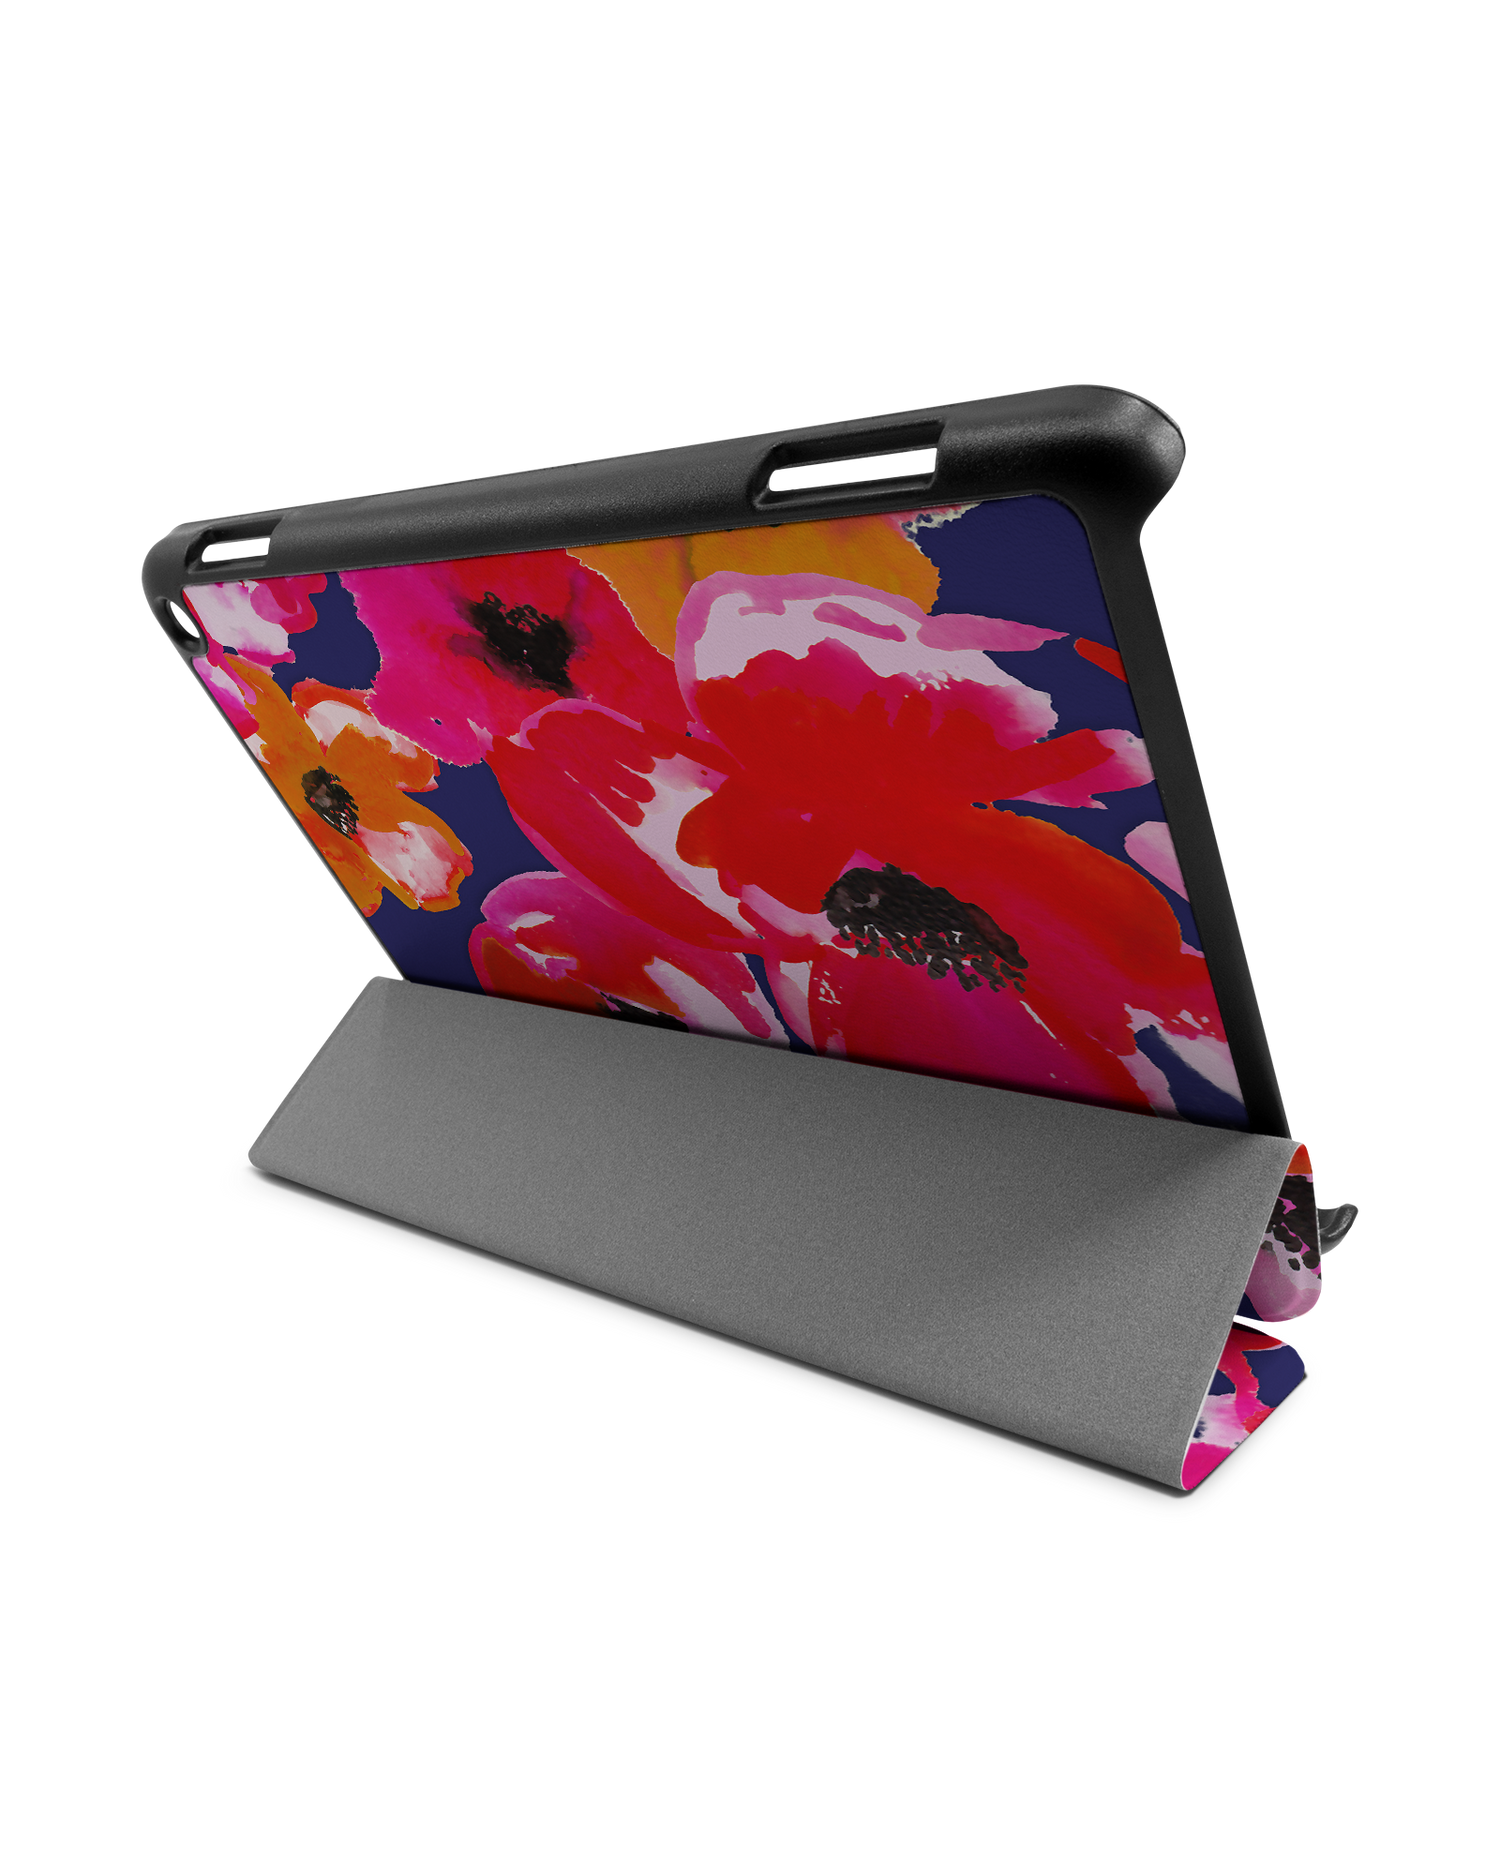 Painted Poppies Tablet Smart Case for Amazon Fire HD 8 (2022), Amazon Fire HD 8 Plus (2022), Amazon Fire HD 8 (2020), Amazon Fire HD 8 Plus (2020): Used as Stand